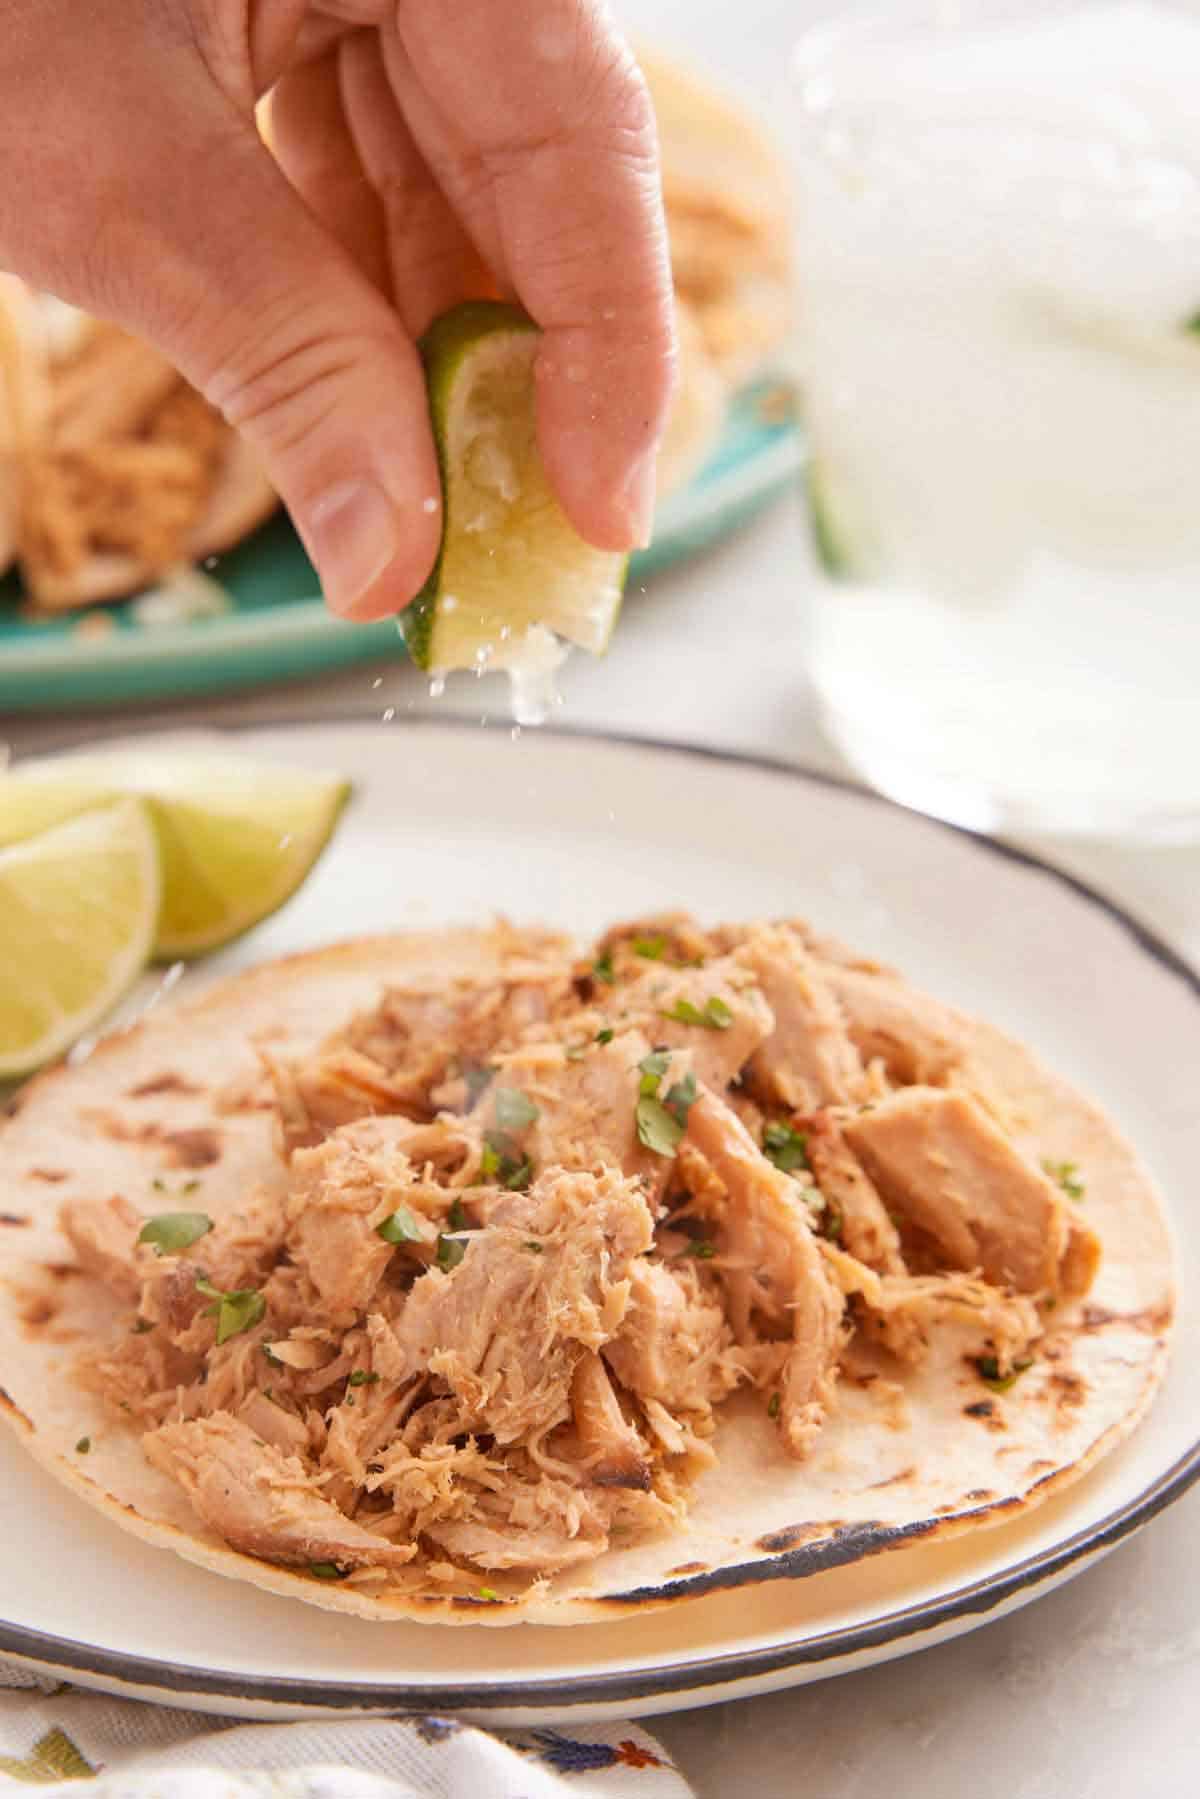 A lime wedge squeezed over slow cooker carnitas on a tortilla on a plate.